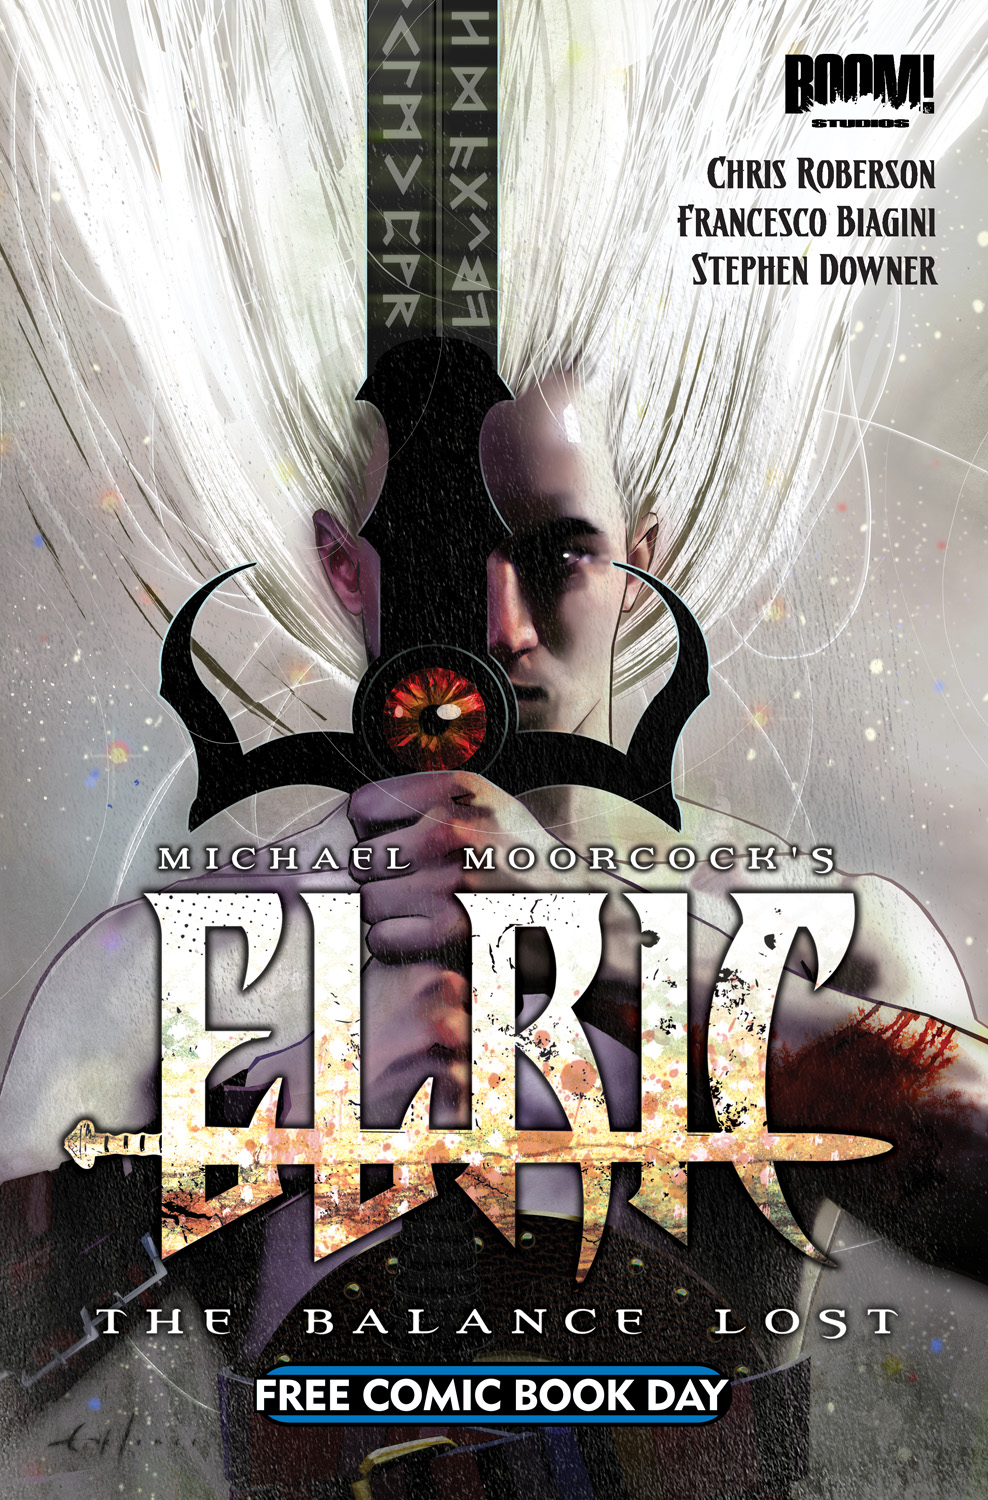 Elric: The Balance Lost Art